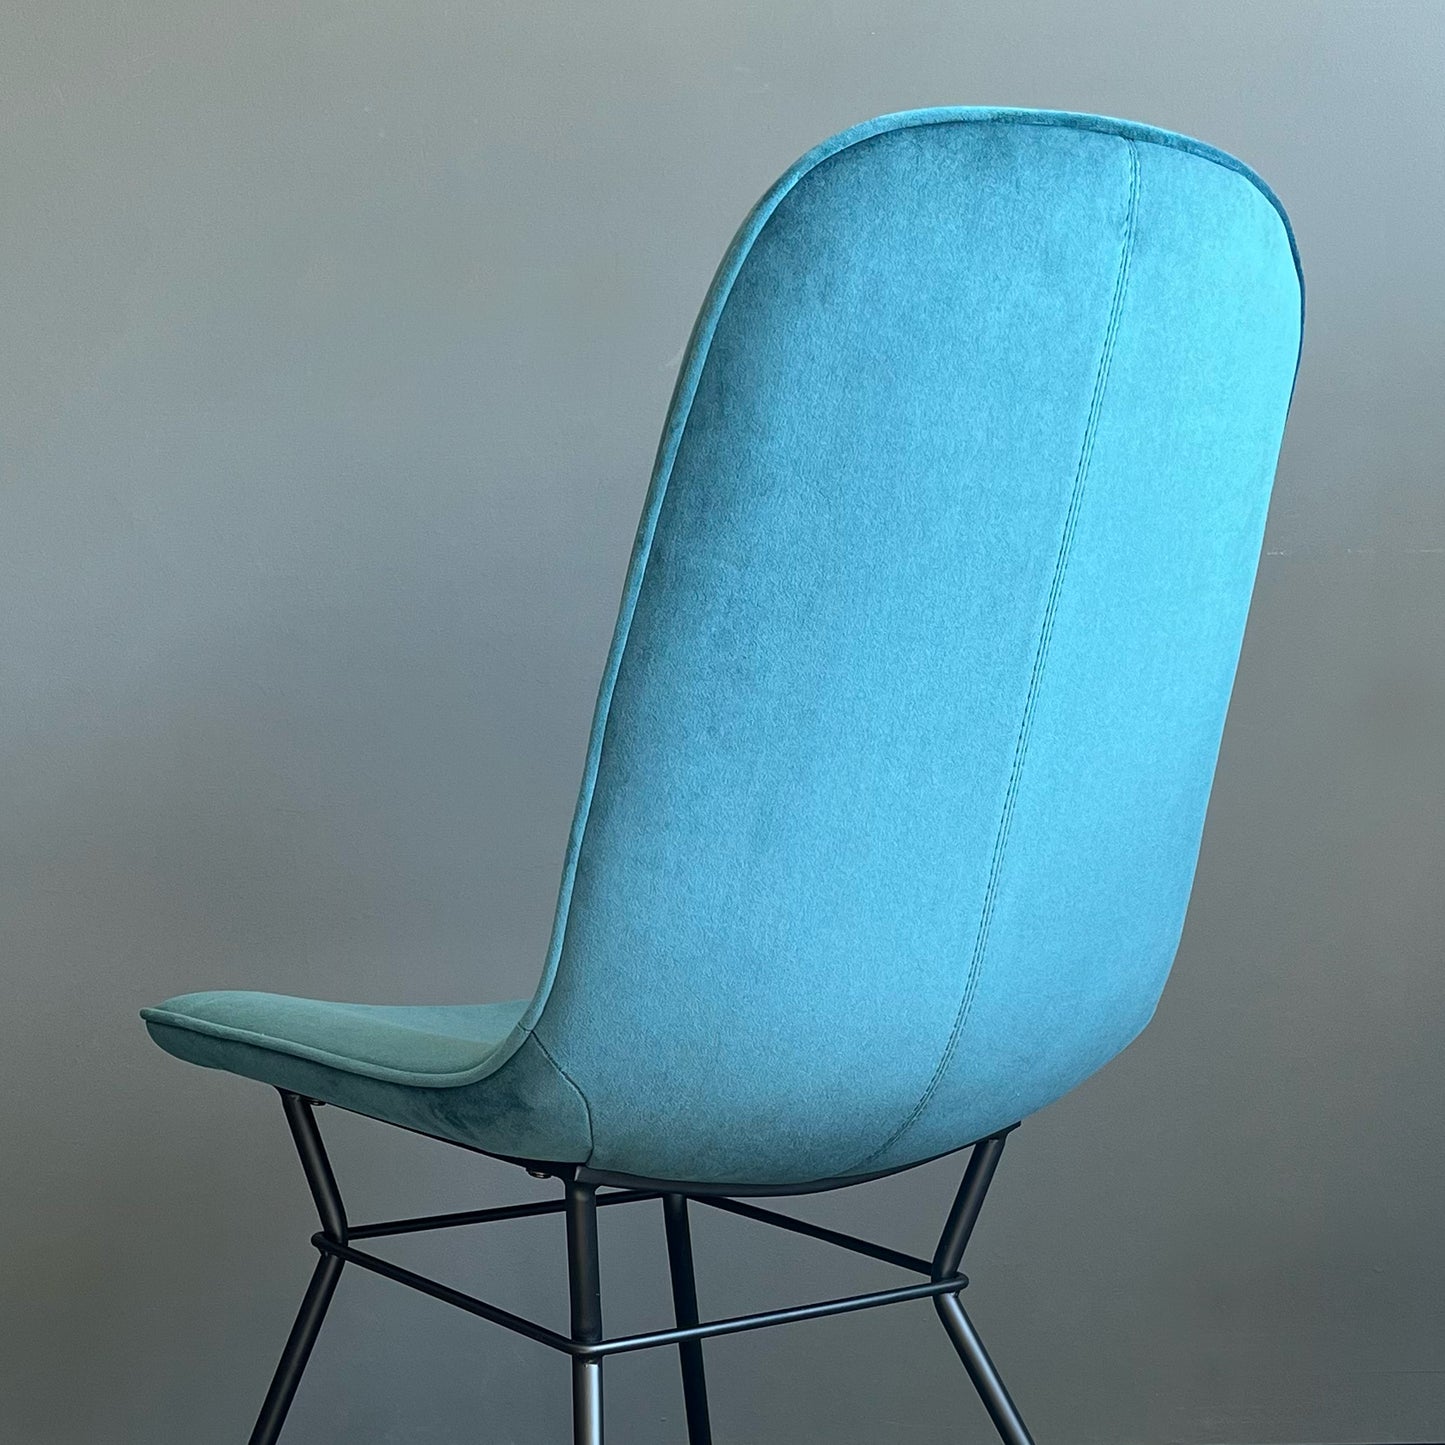 Teal Dining Chair - Set Of 2